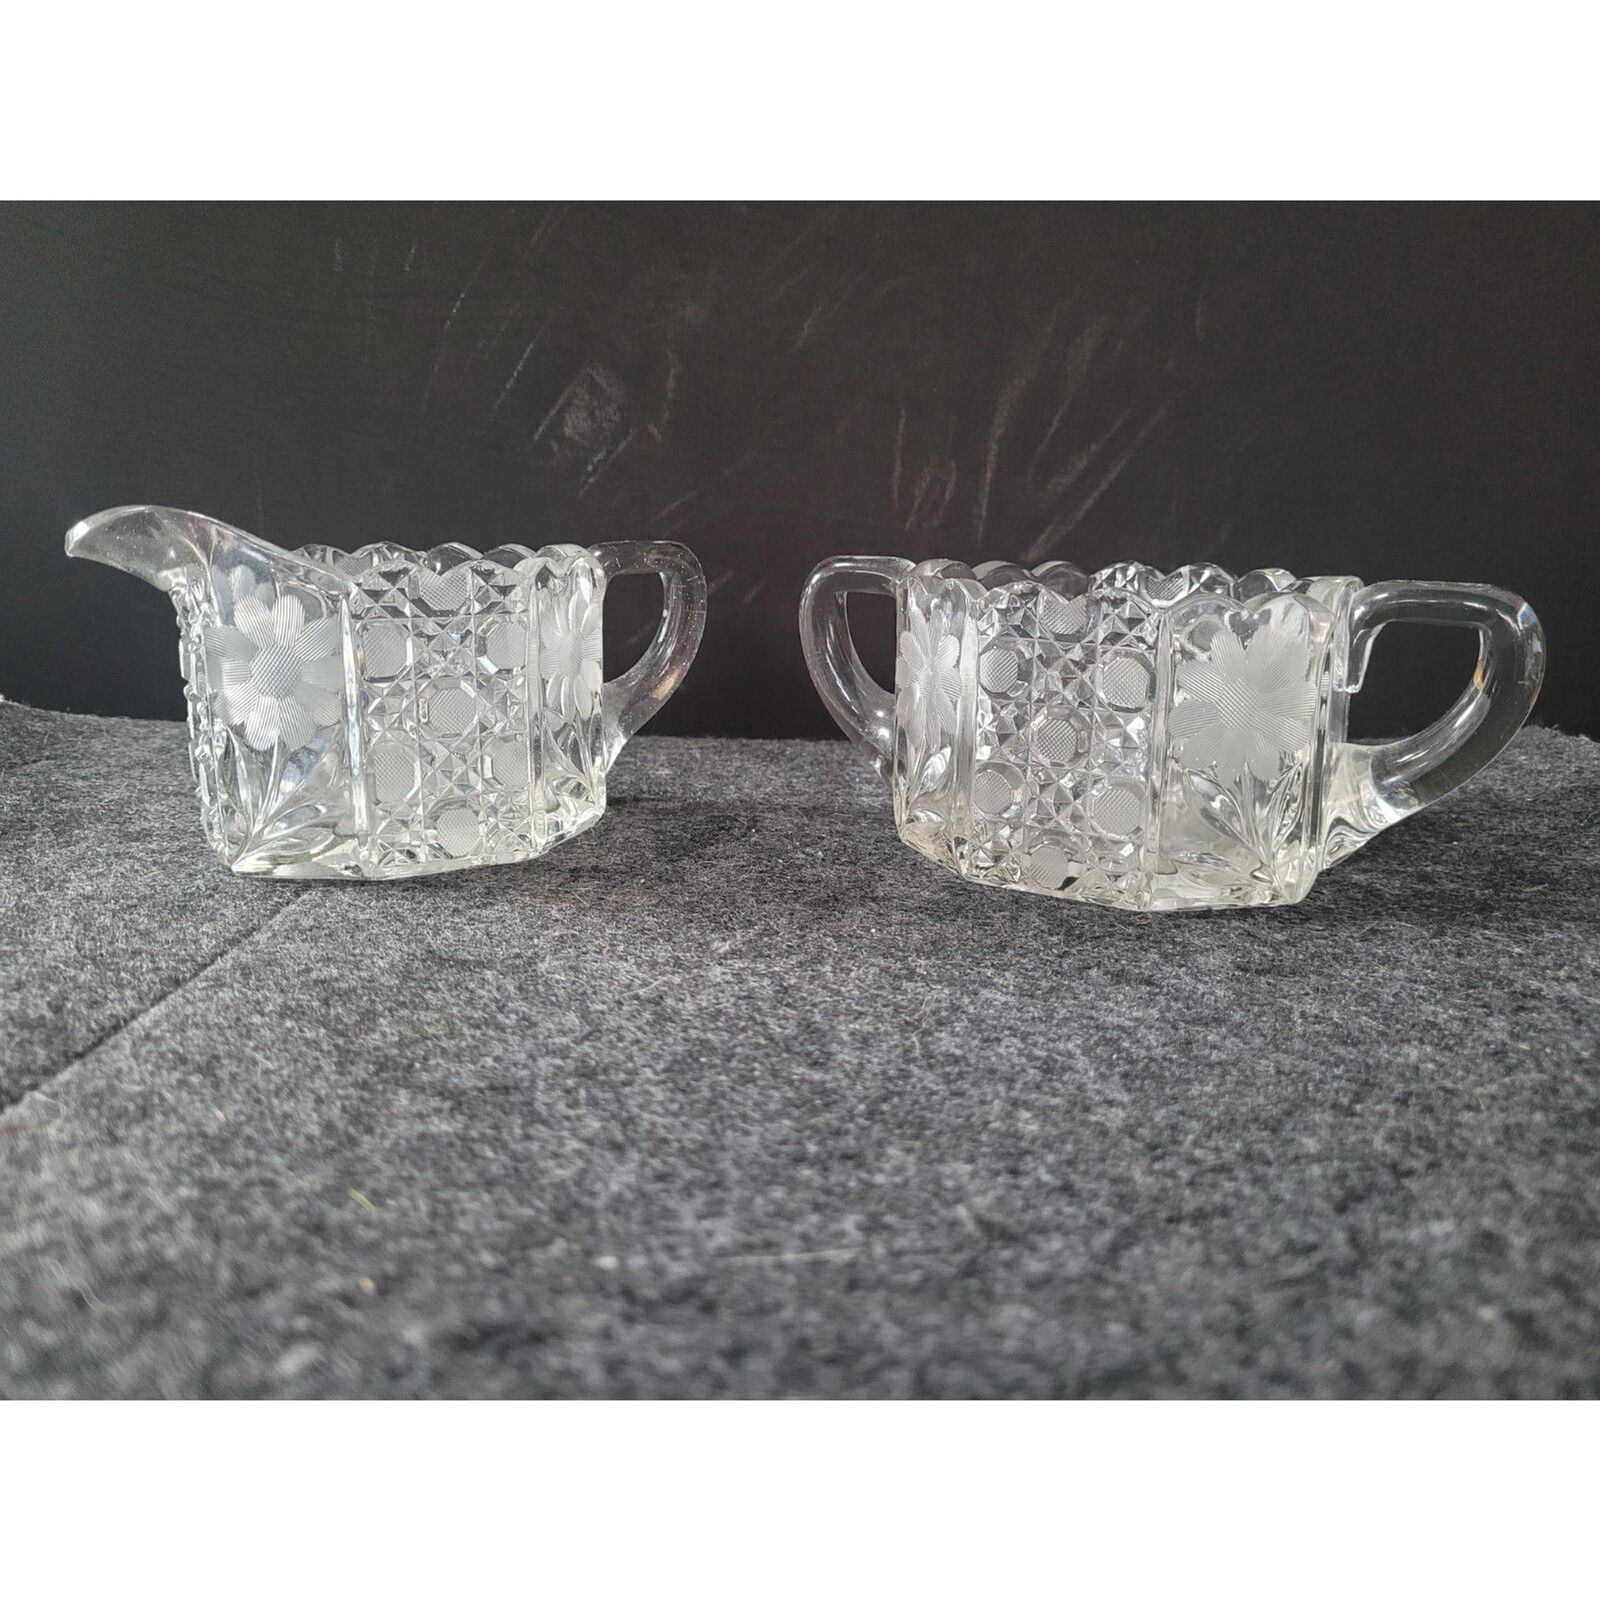 Antique 1910s-20s McKee Glass Sugar and Creamer Innovations